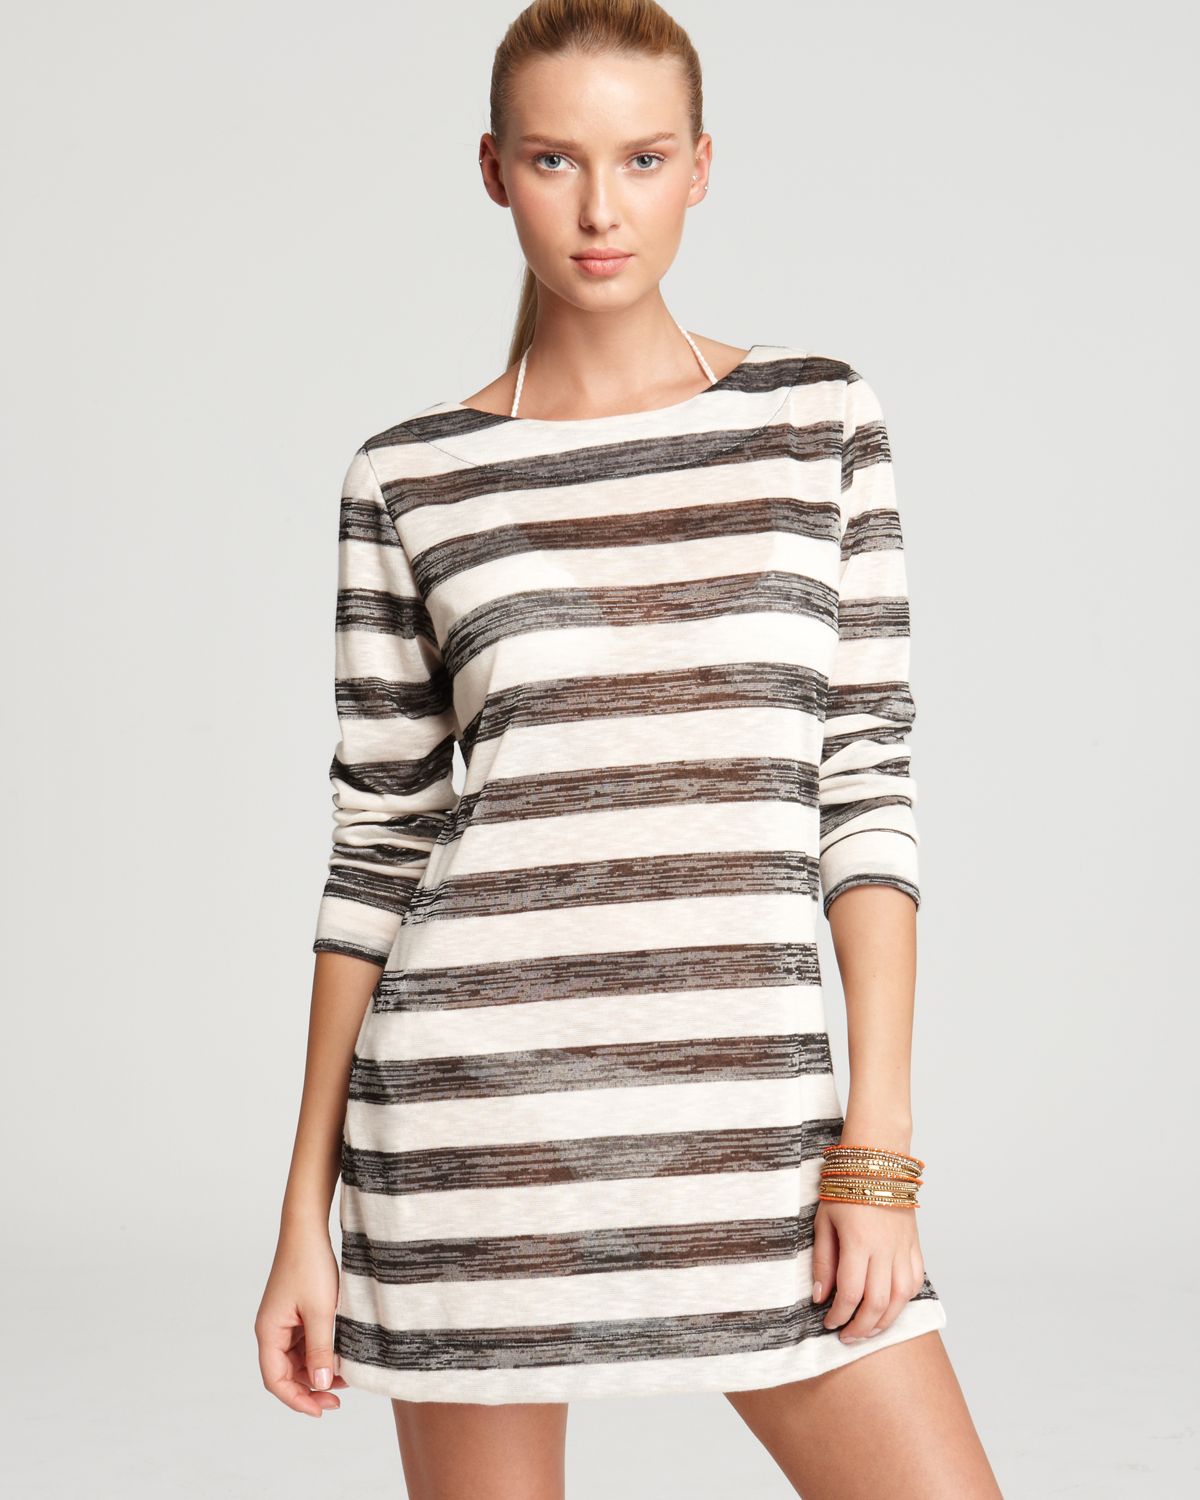 Lyst - La Blanca Boatneck Striped Tunic Swimsuit Cover Up in Black